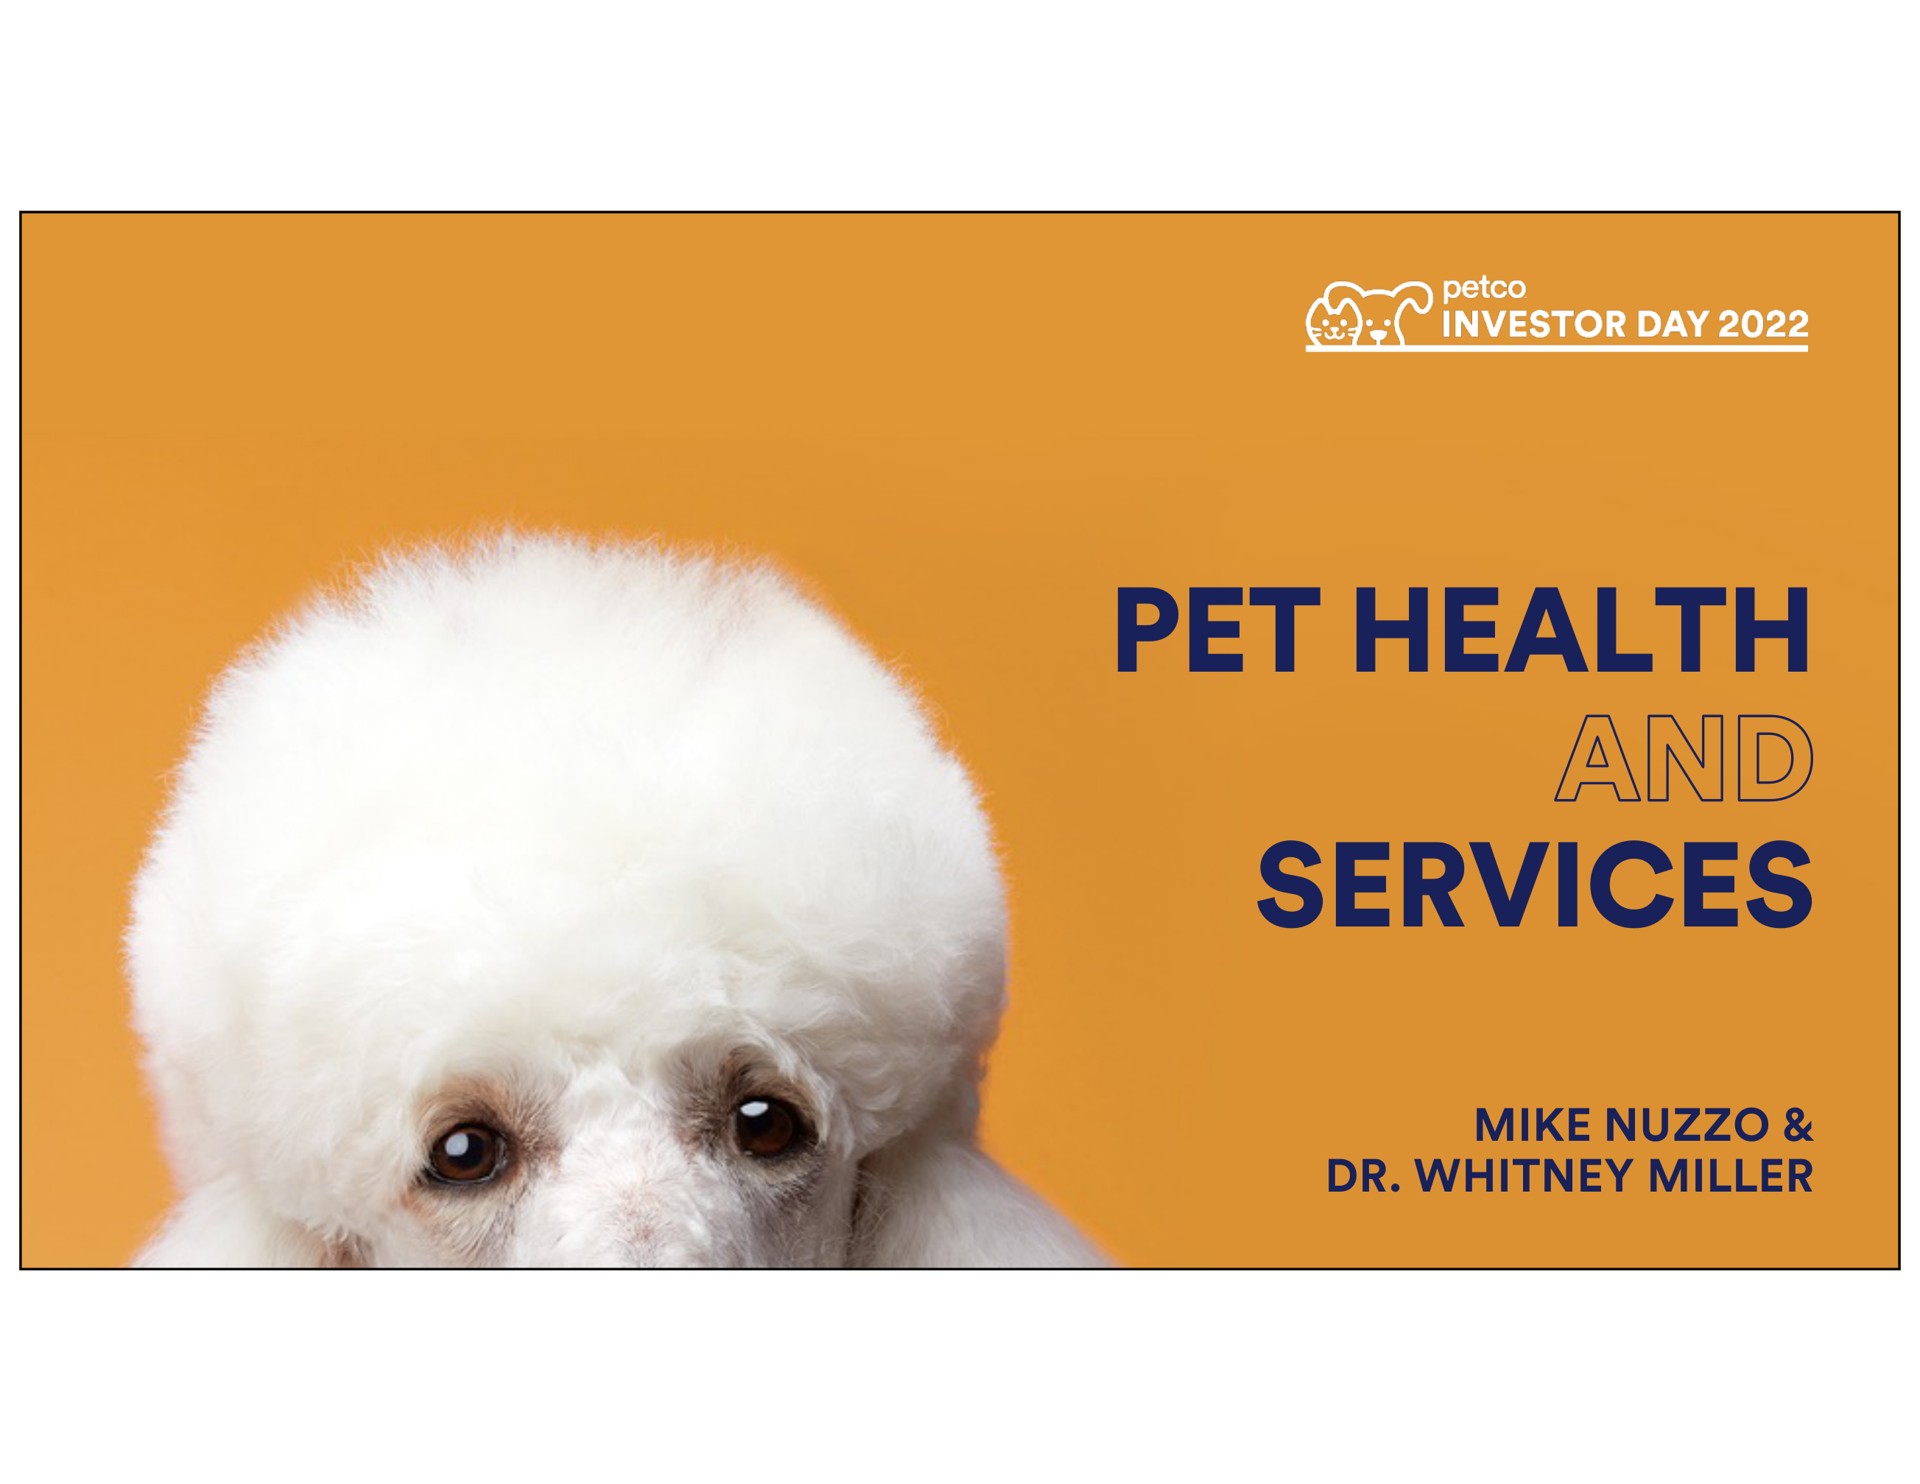 pet health services mike miller investor day | Petco